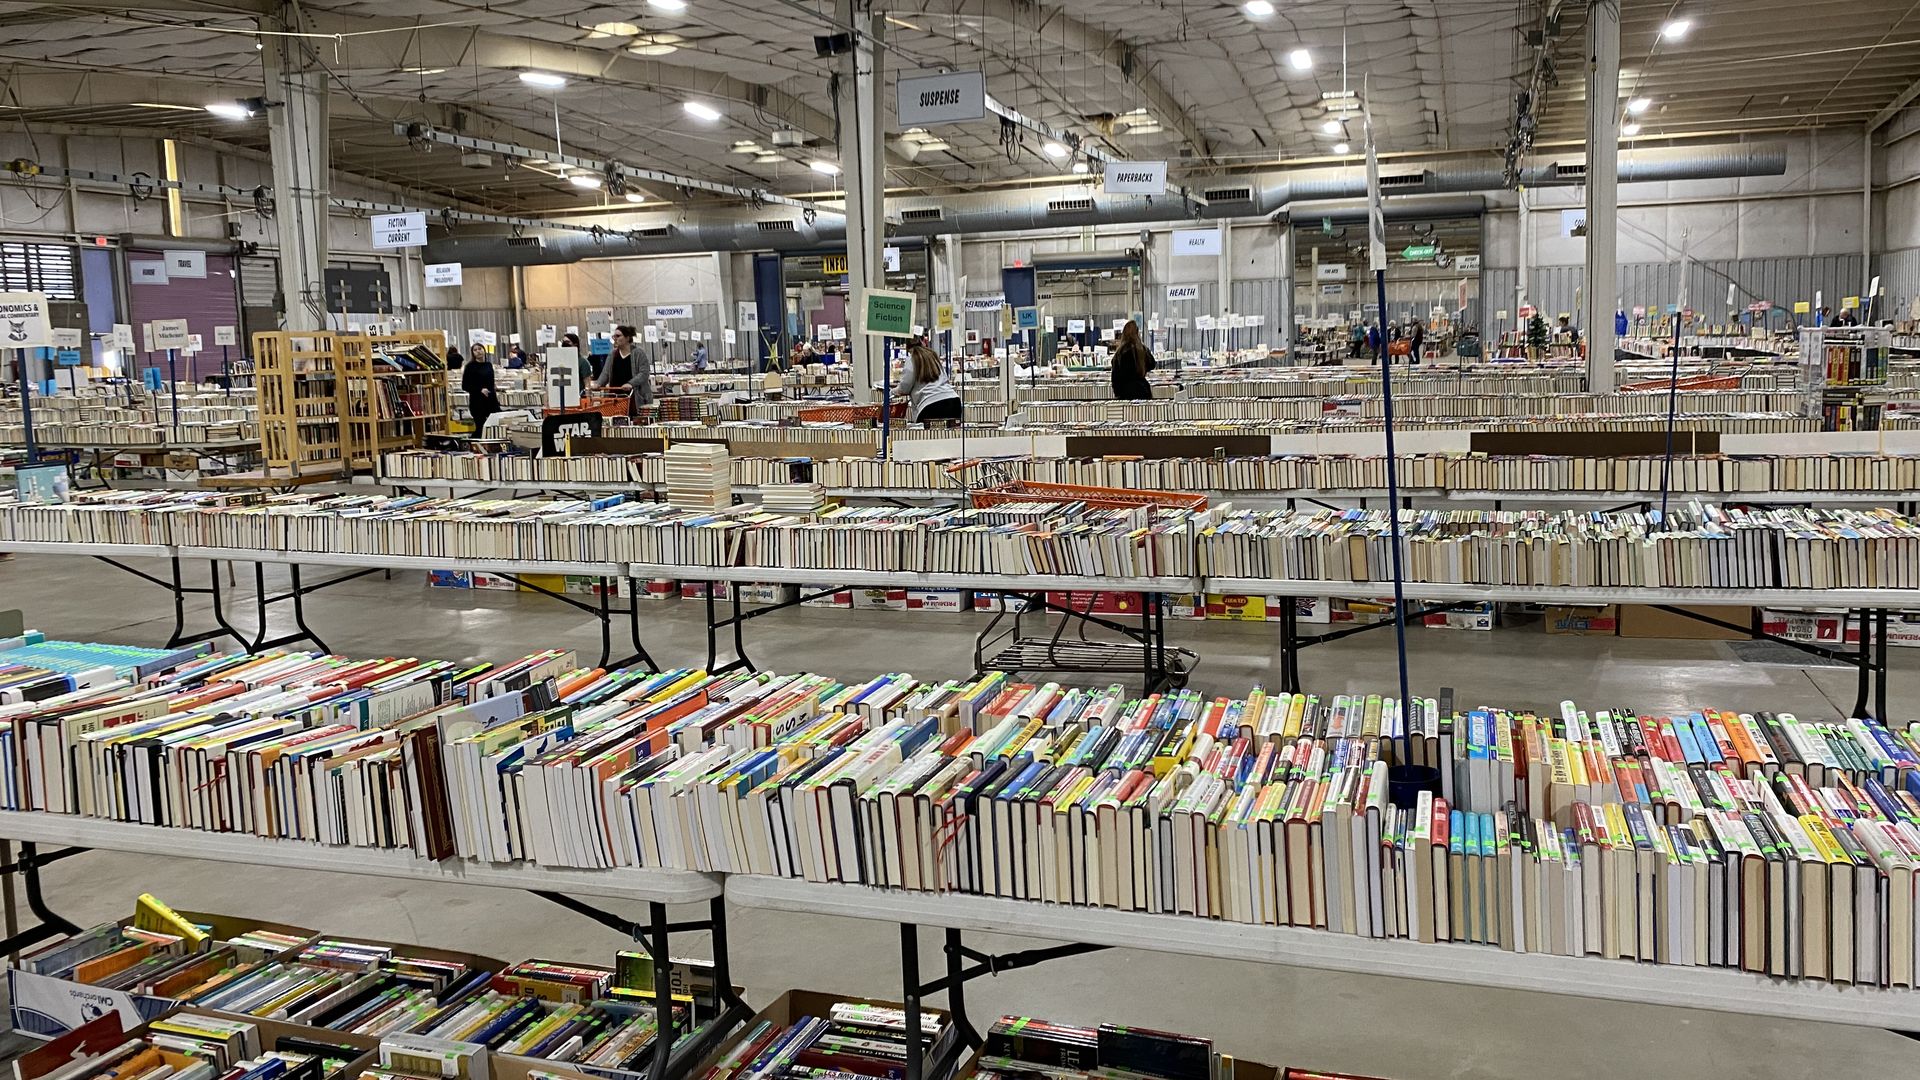 The 66th VNSA Used Book Sale is this weekend at the state fairgrounds